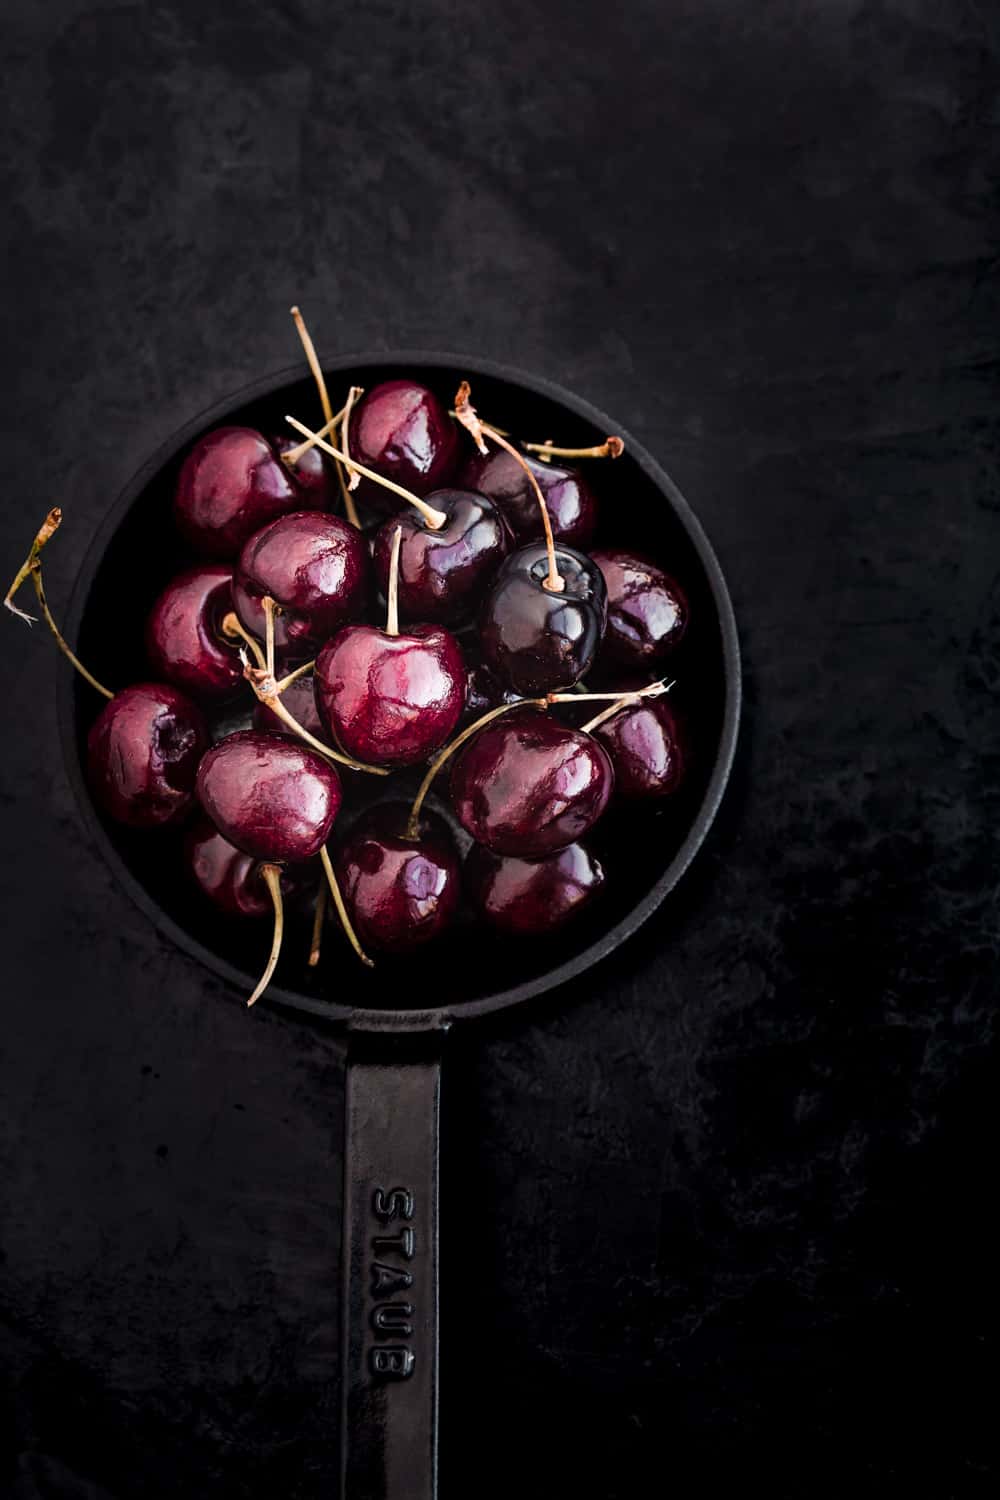 Whole cherries, with their stems, on a little cast iron skillet.